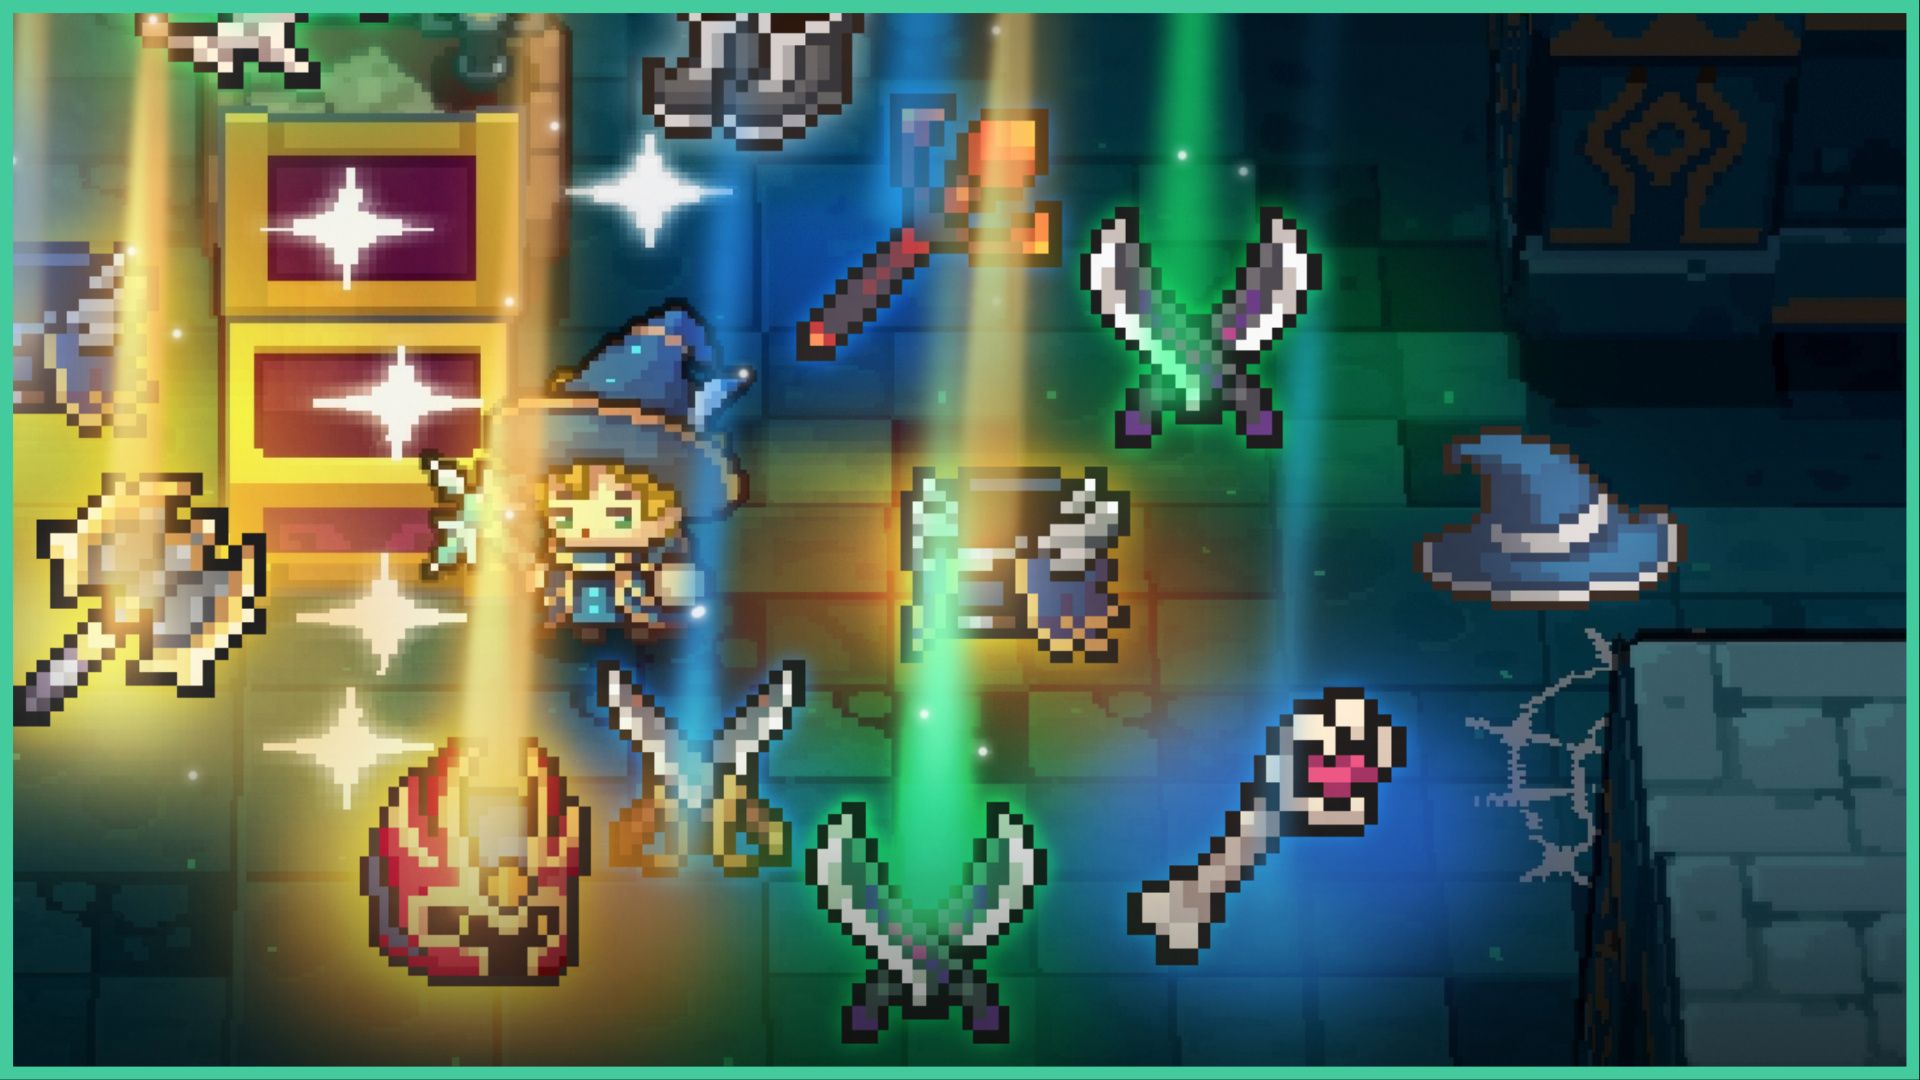 feature image for our soul knight prequel codes guide, the image features a screenshot from the game of a character wearing a wizard hat and robes by an open chest as armor and weapons float around while glowing with sparkles and stars